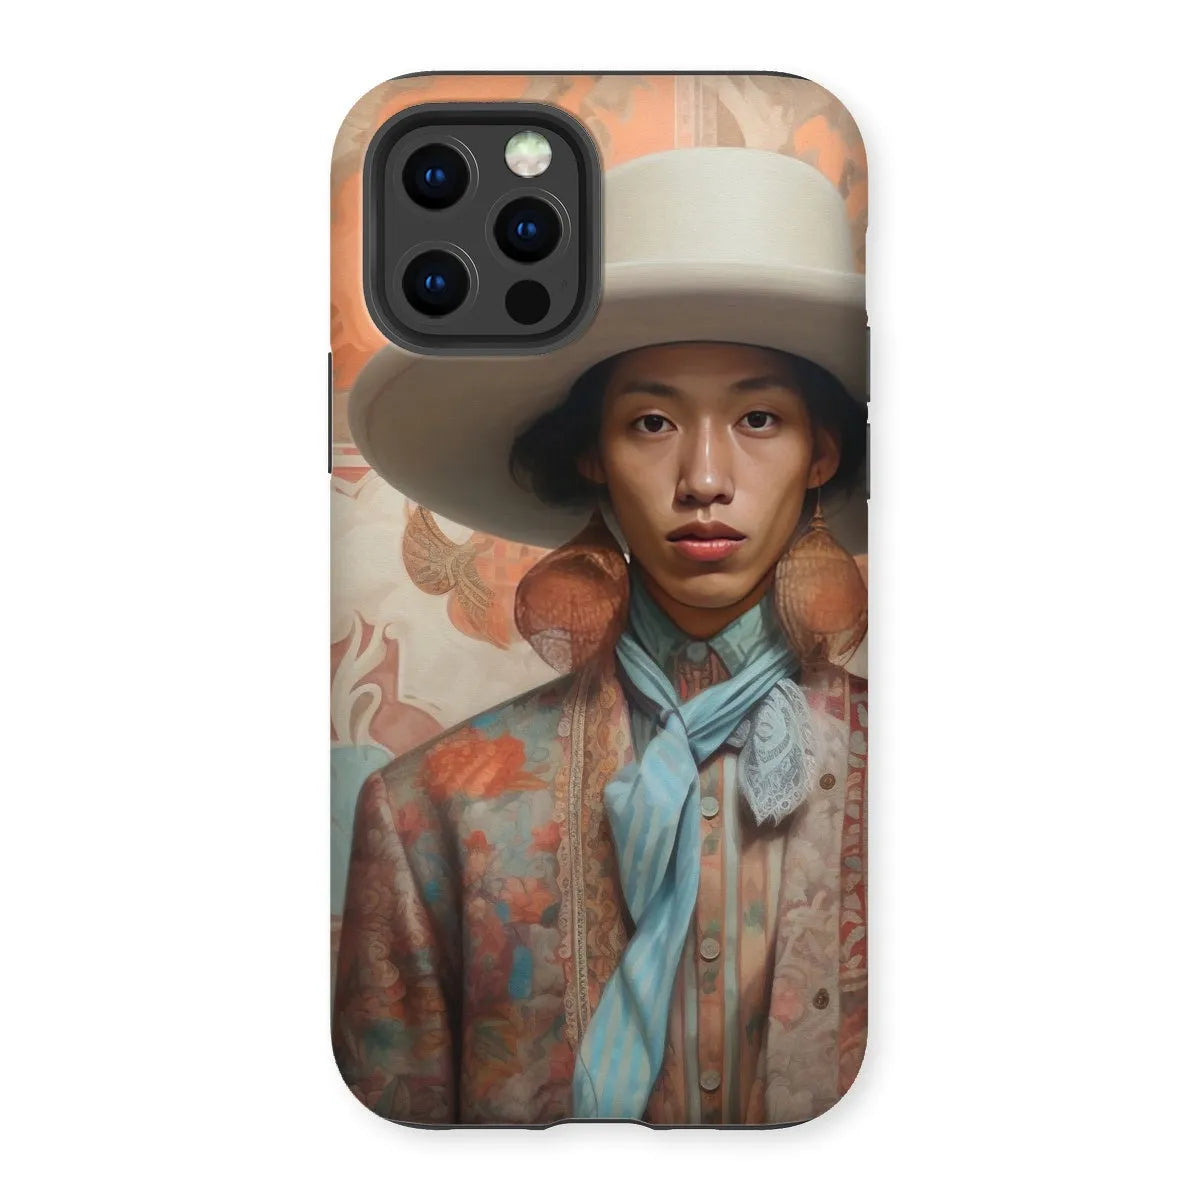 Iyaan The Gay Cowboy - Dandy Gay Aesthetic Art Phone Case - Iphone 12 Pro / Matte - Mobile Phone Cases - Aesthetic Art